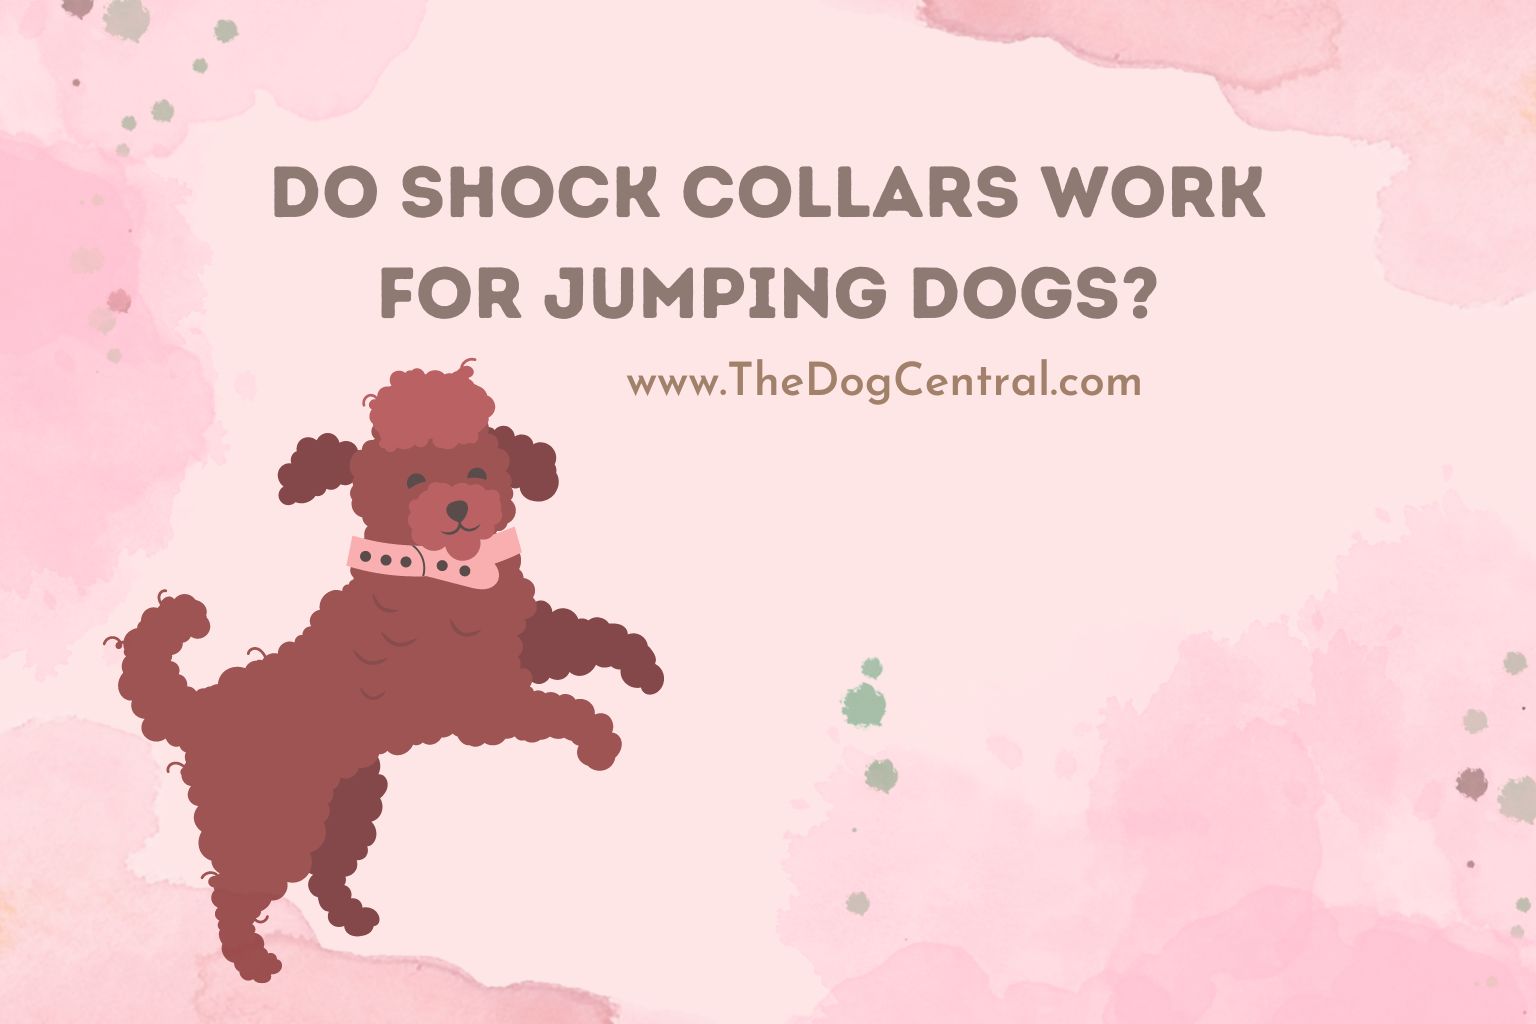 Do shock collars work for jumping dogs